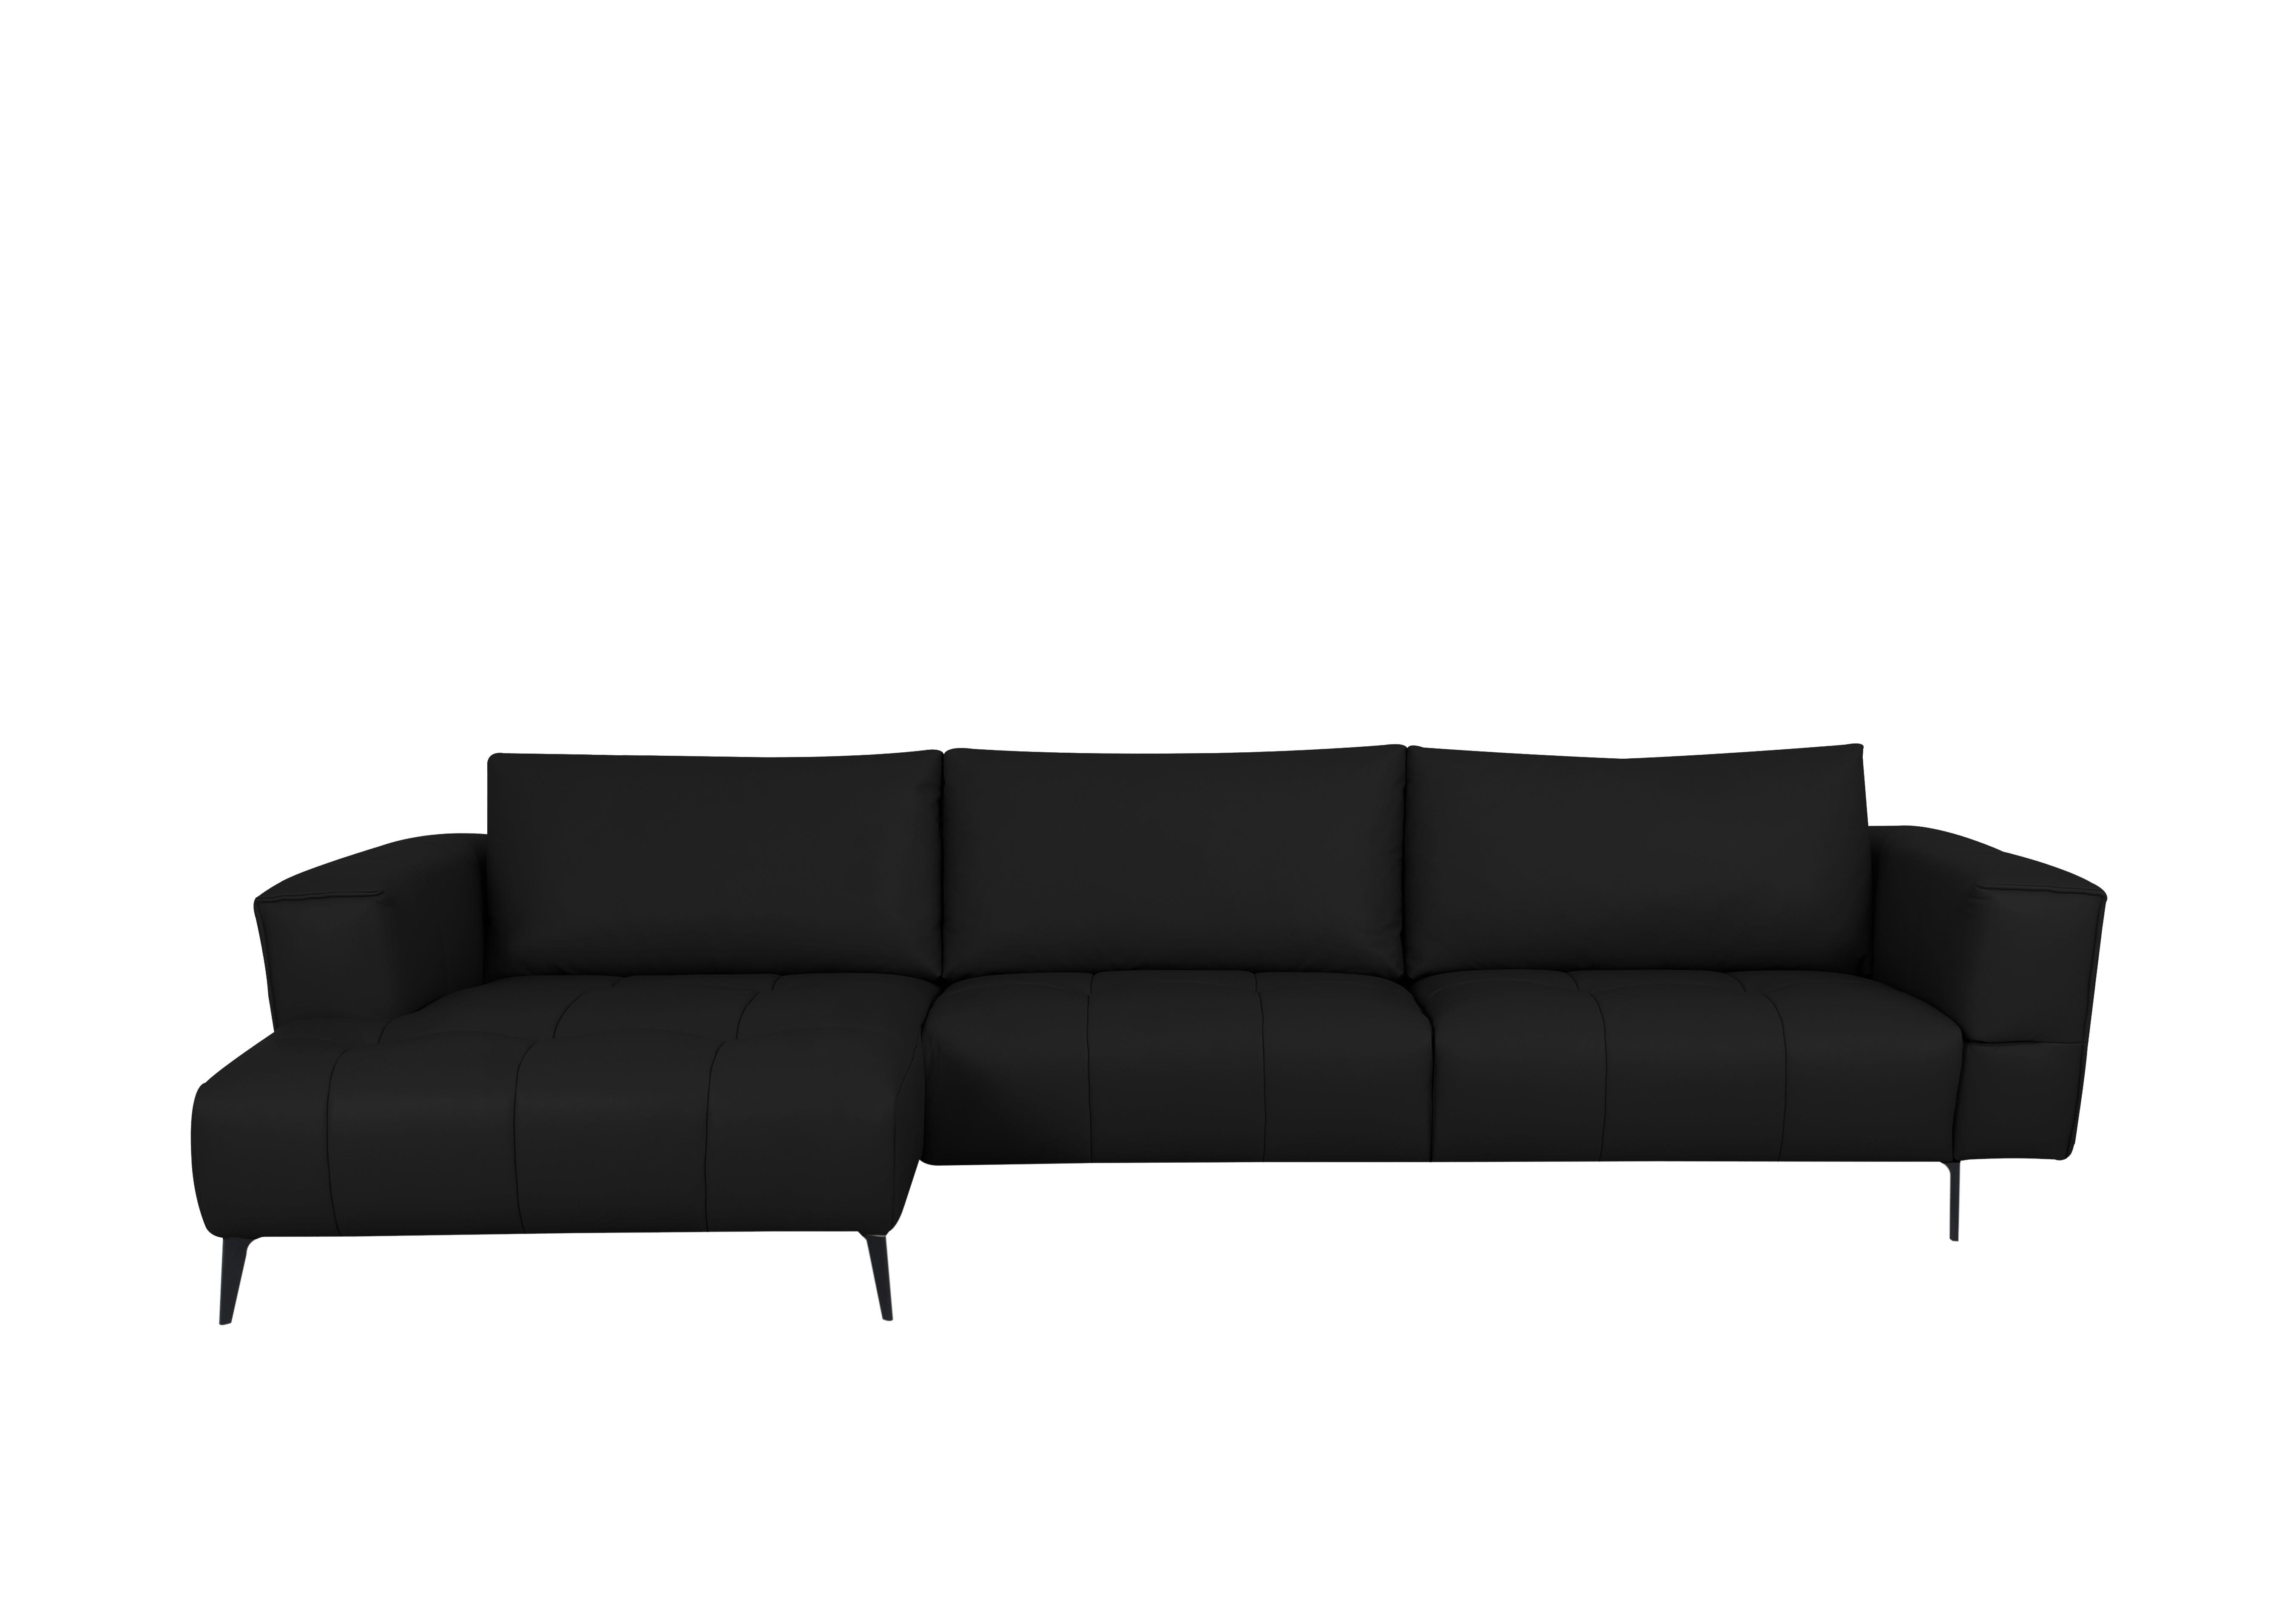 Lawson Leather Chaise End Sofa in Nn-514e Black on Furniture Village